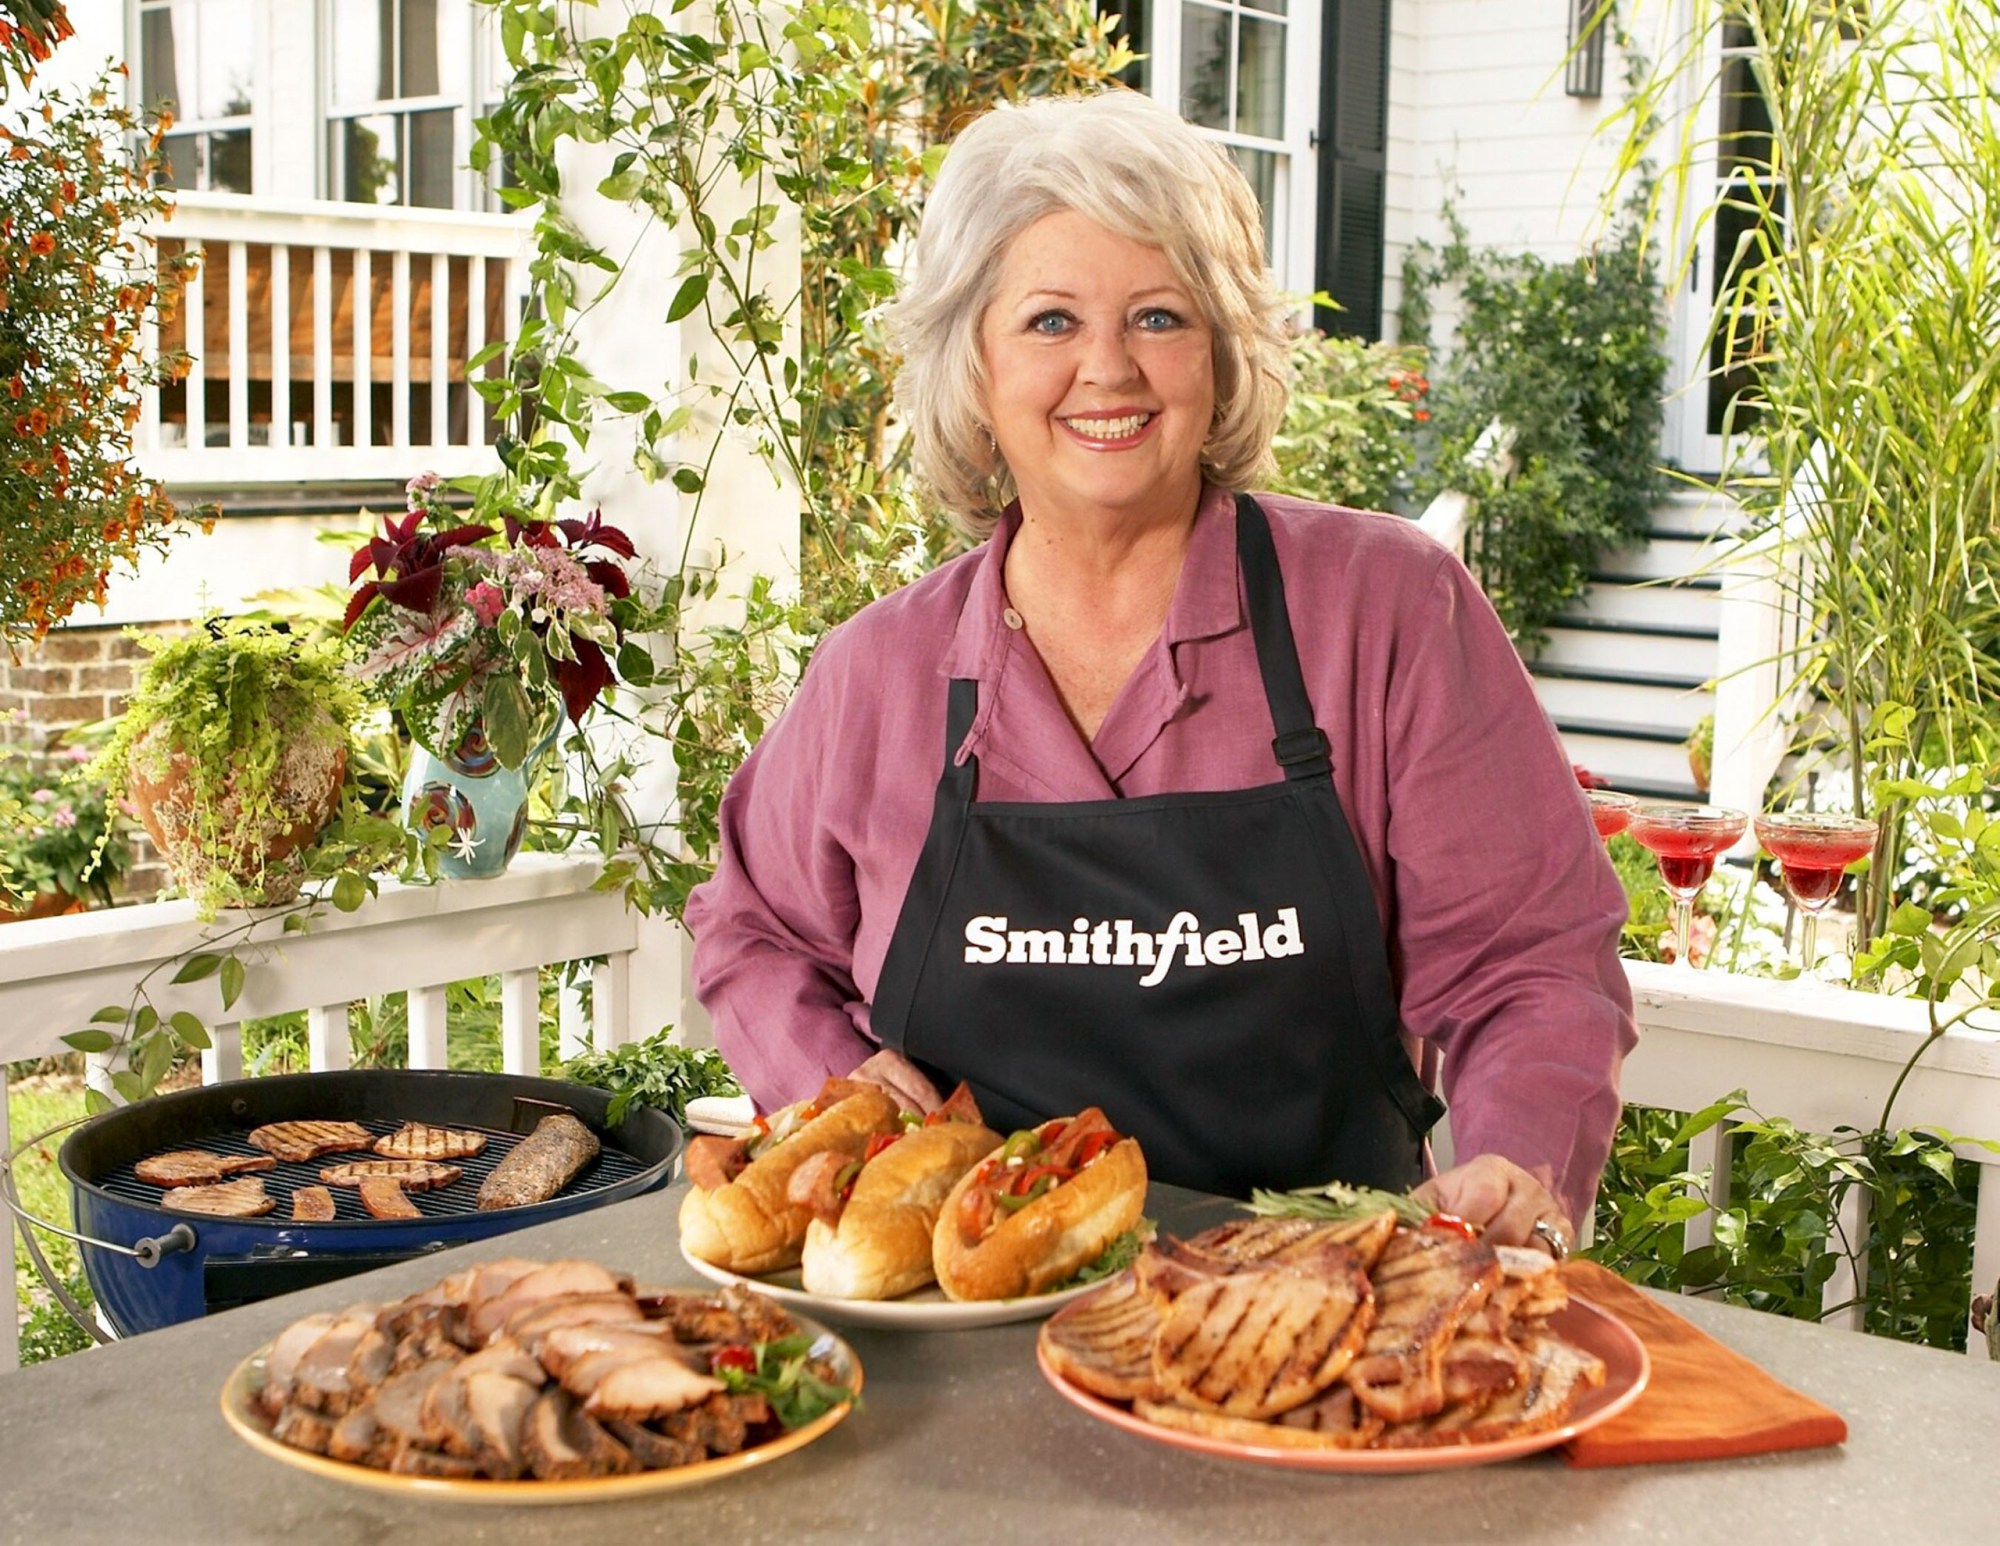 Celebrity chef Paula Deen is seen wearing an apron from Smithfield Foods. The company announced this week that they are dropping her as a spokeswoman in the wake of revelations that she used racial slurs in the past. (AP/Smithfield Foods)